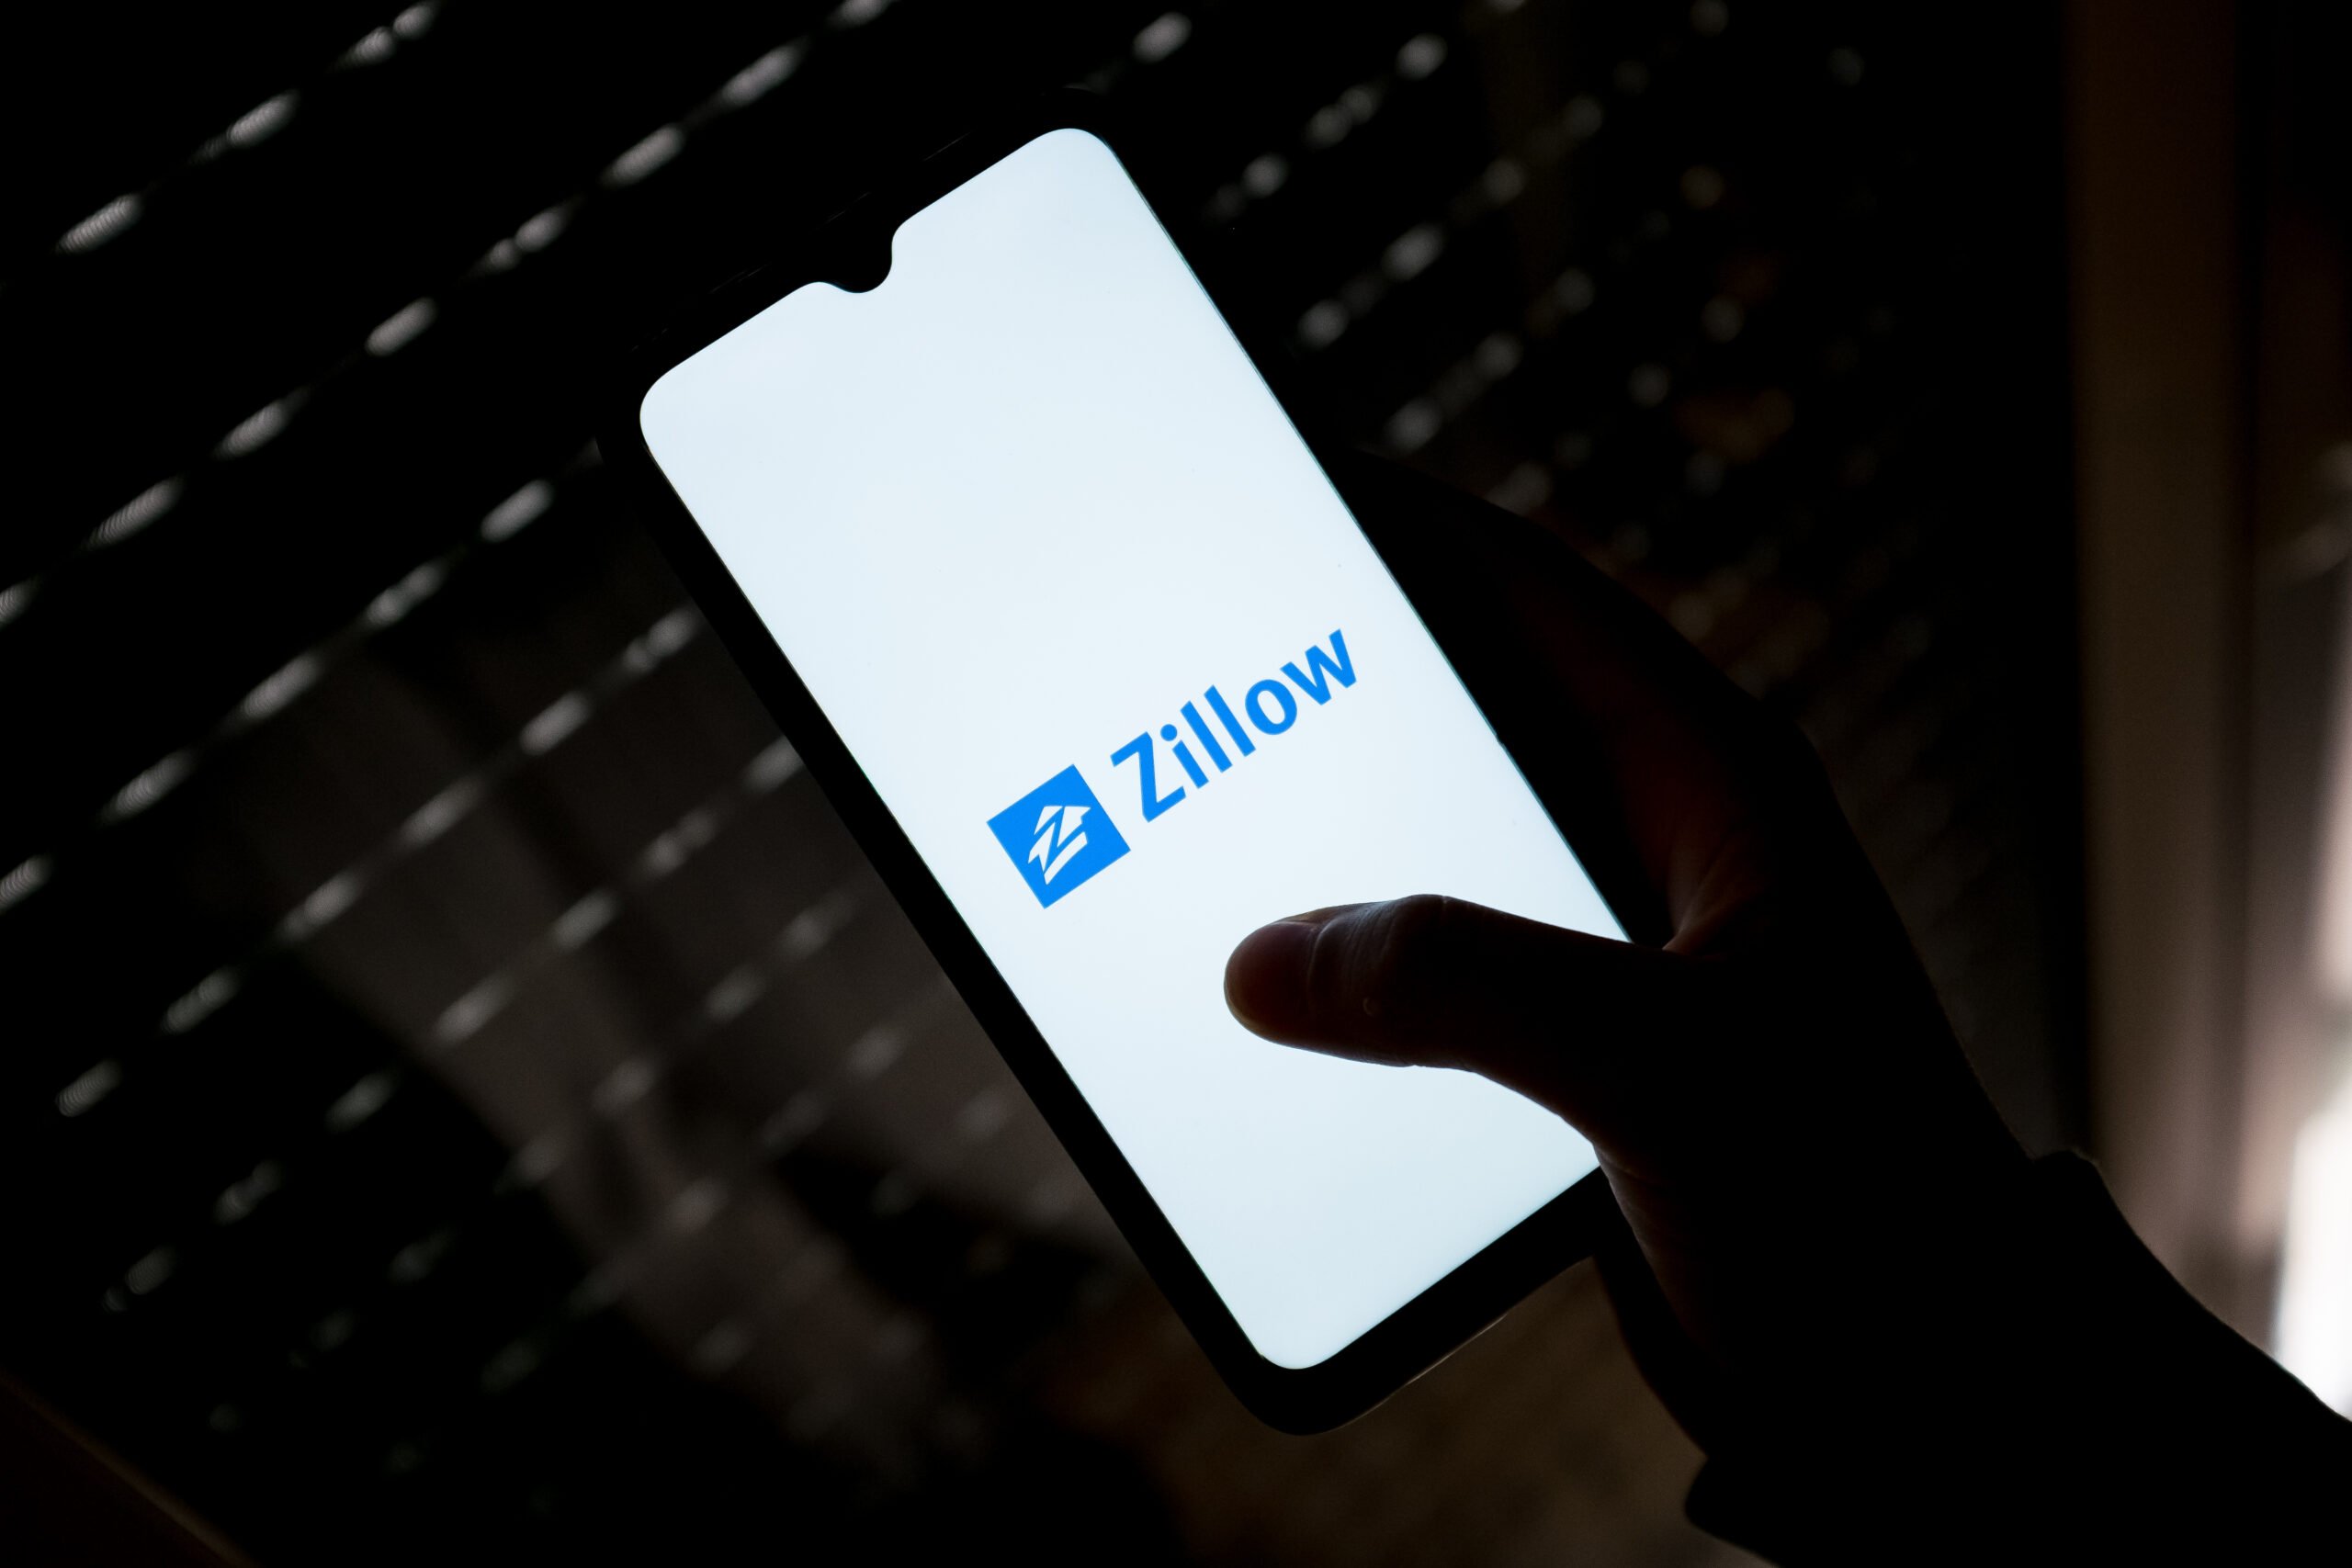 Zillow now accounts for nearly half of all real estate web traffic: Analysis